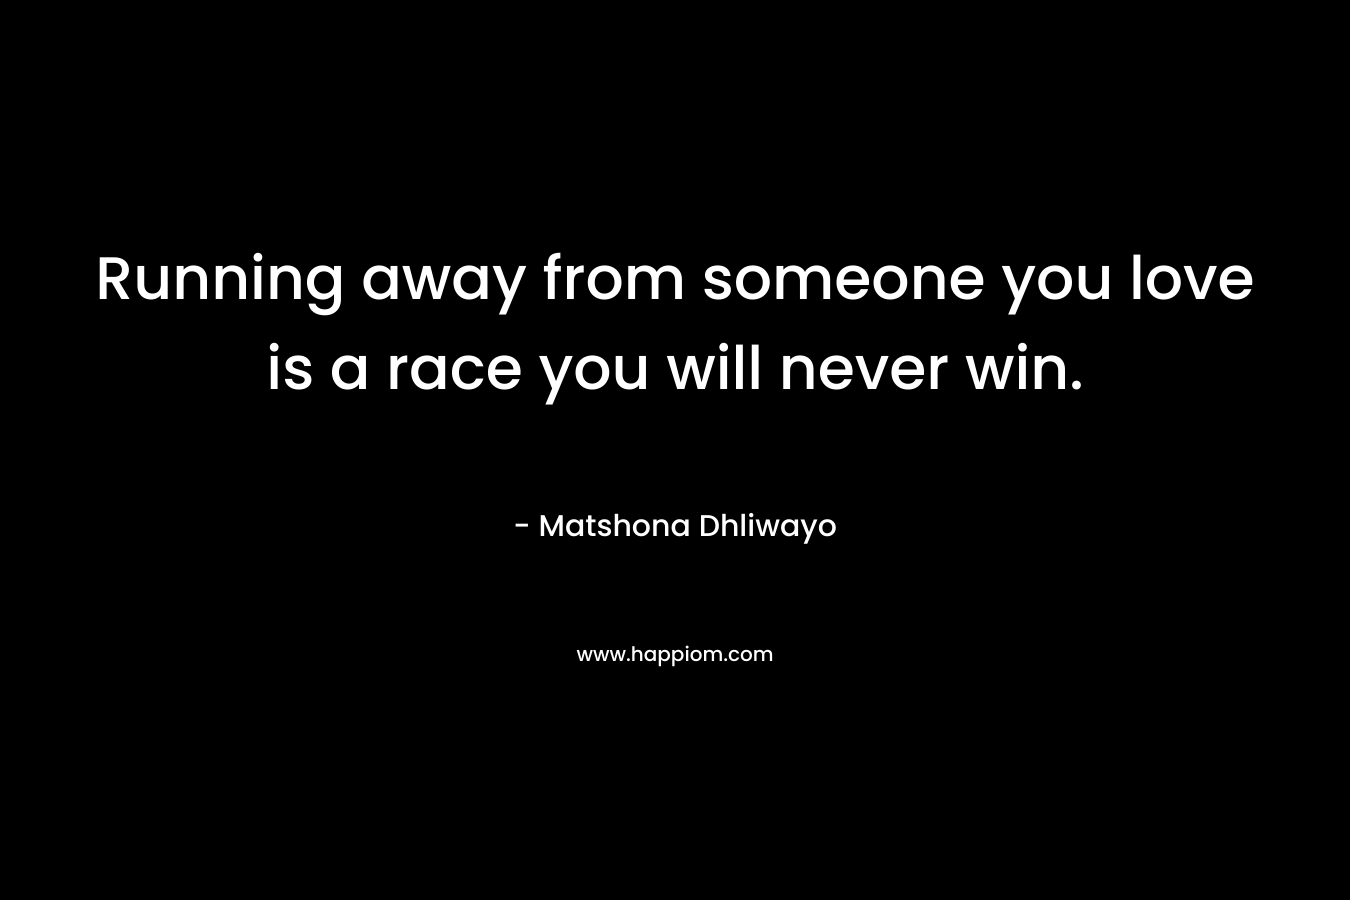 Running away from someone you love is a race you will never win.